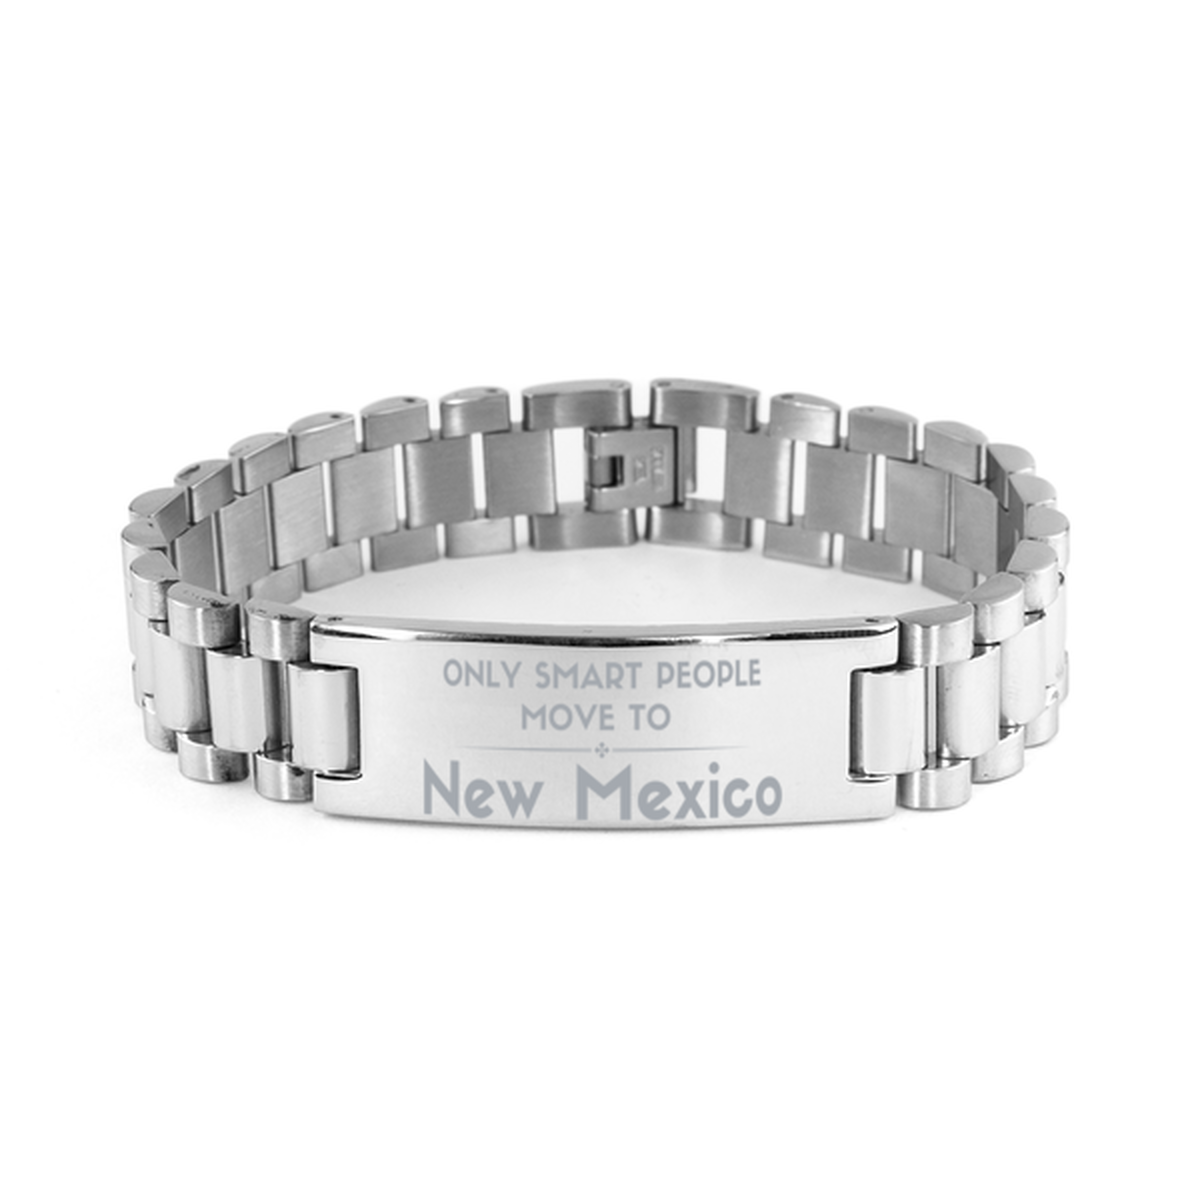 Only smart people move to New Mexico Ladder Stainless Steel Bracelet, Gag Gifts For New Mexico, Move to New Mexico Gifts for Friends Coworker Funny Saying Quote